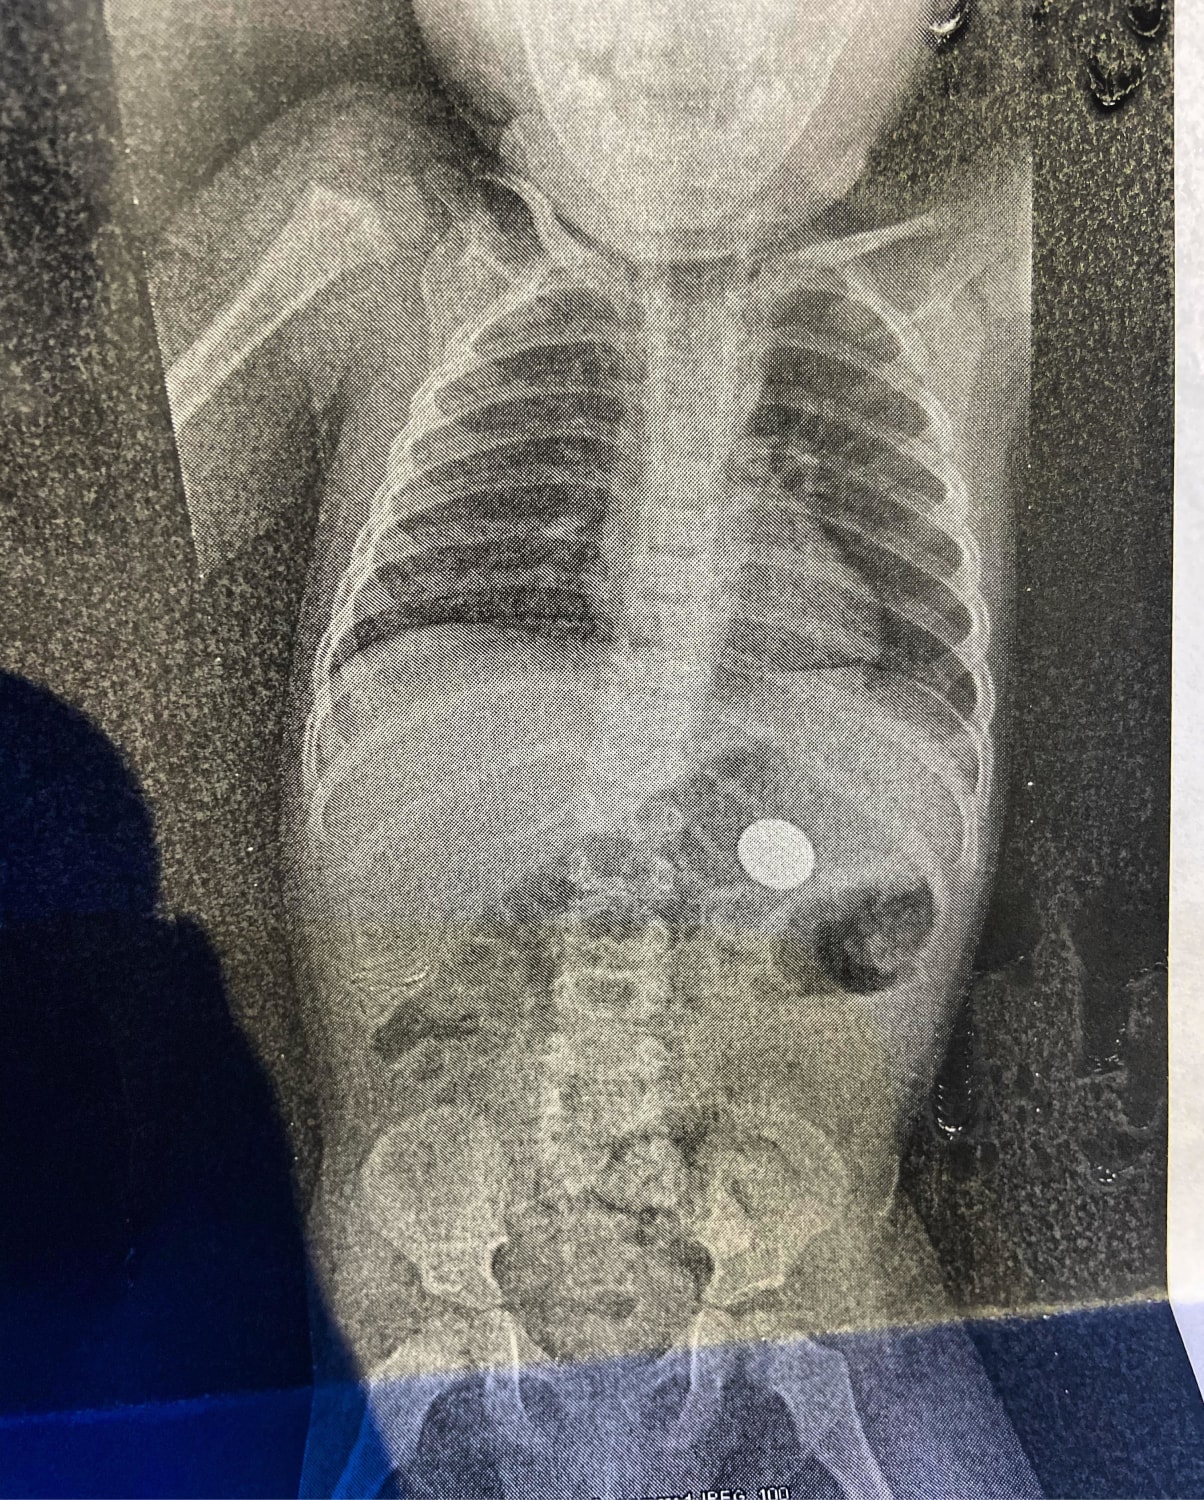 On Valentine’s Day my son decided to show me his first Magic trick how to make a coin disappear............1 X-ray later I found it 🤦‍♂️❤️